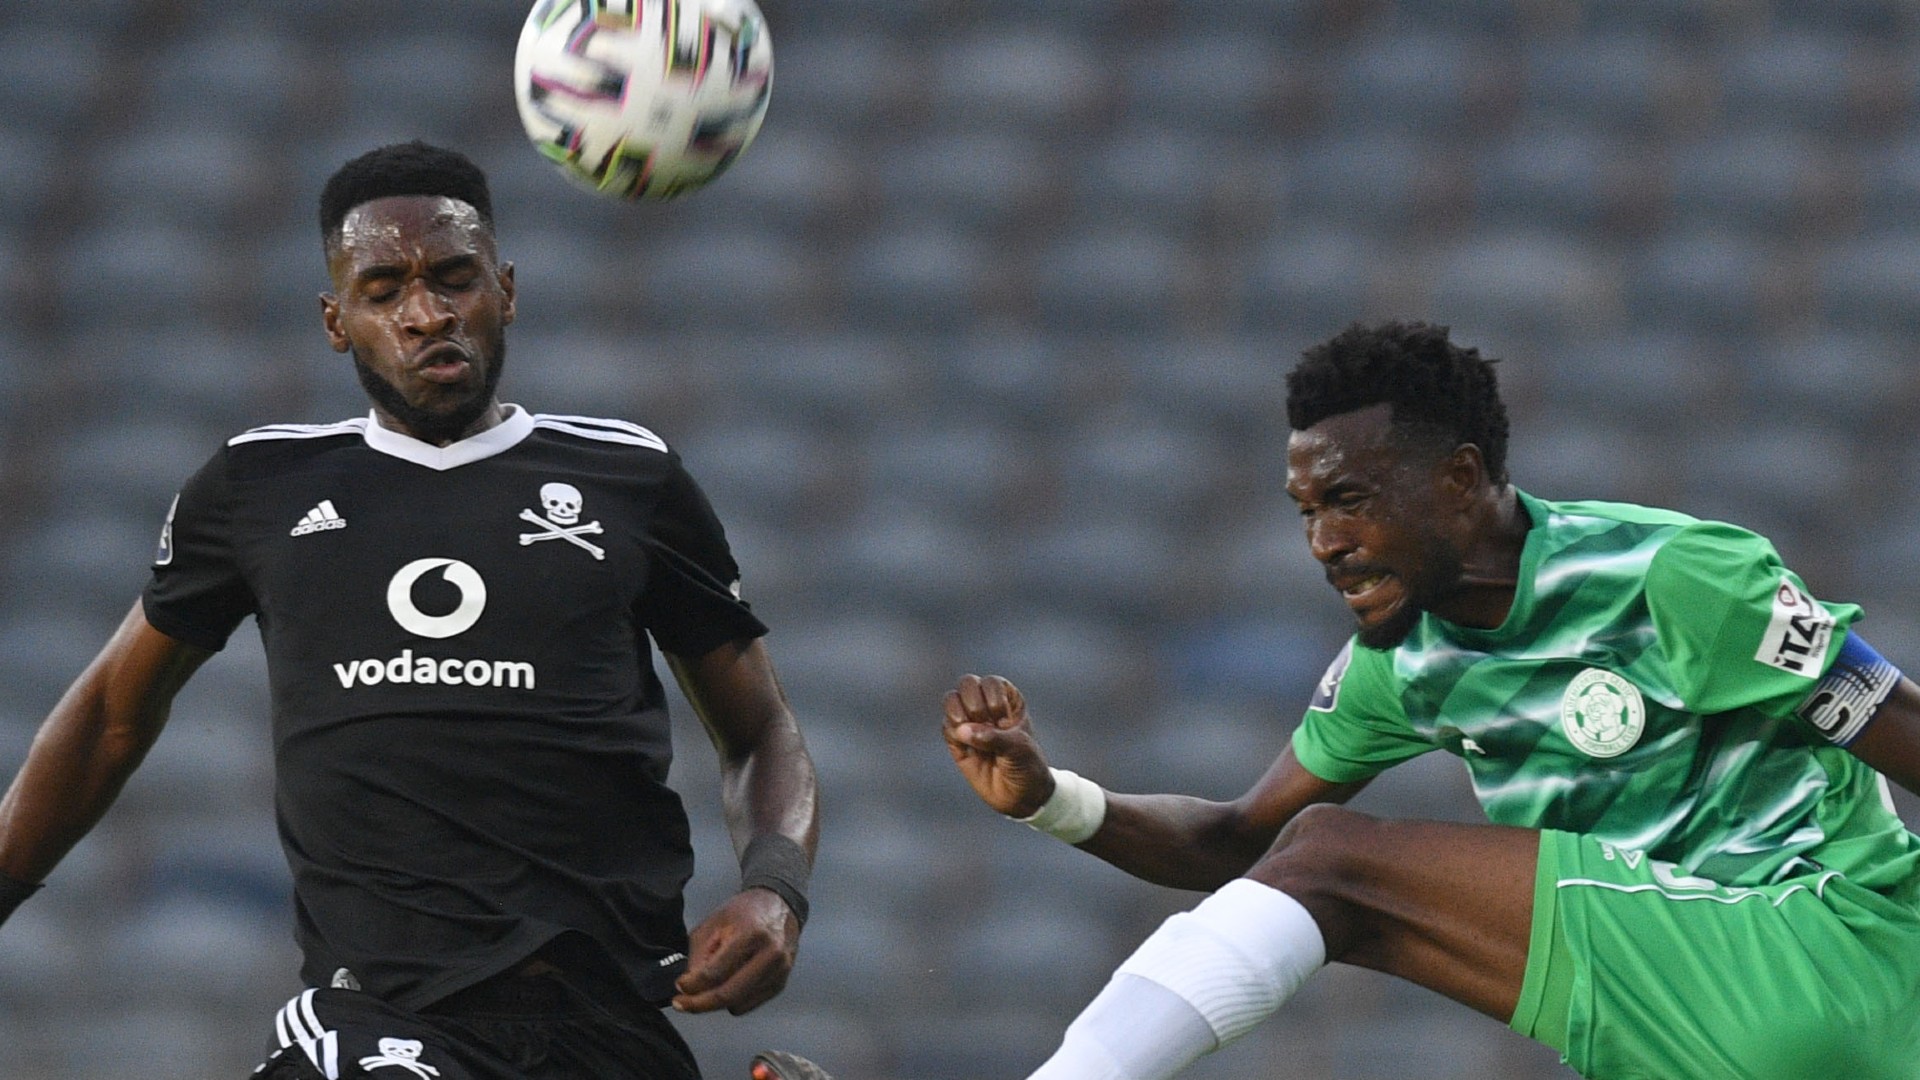 Orlando Pirates vs Royal AM Preview: Kick-off time, TV channel, squad news